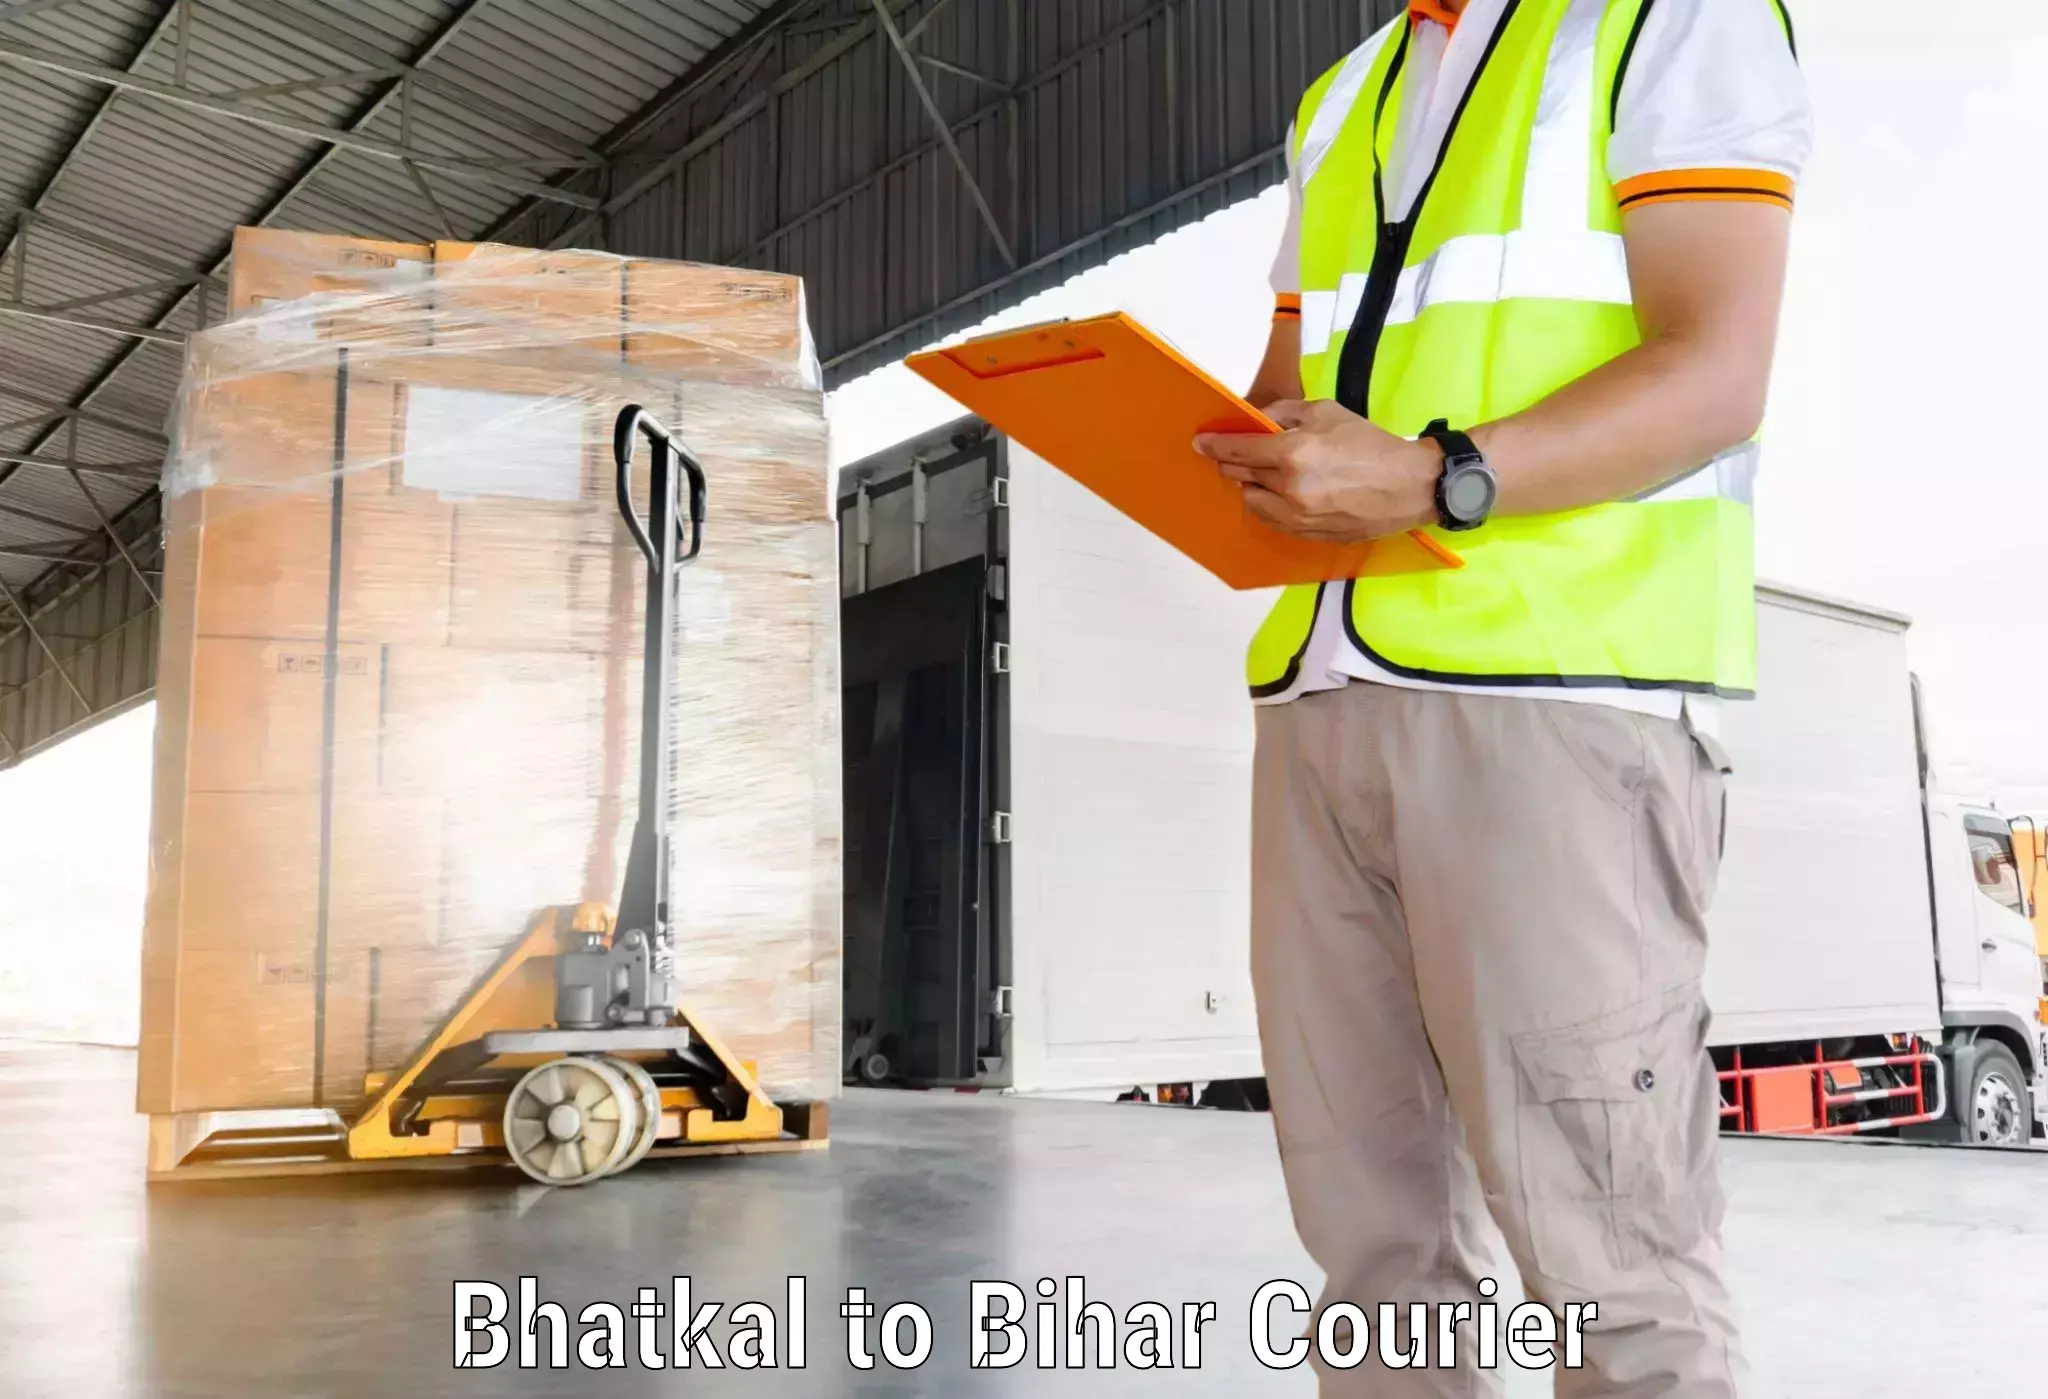 Customizable delivery plans in Bhatkal to Vaishali